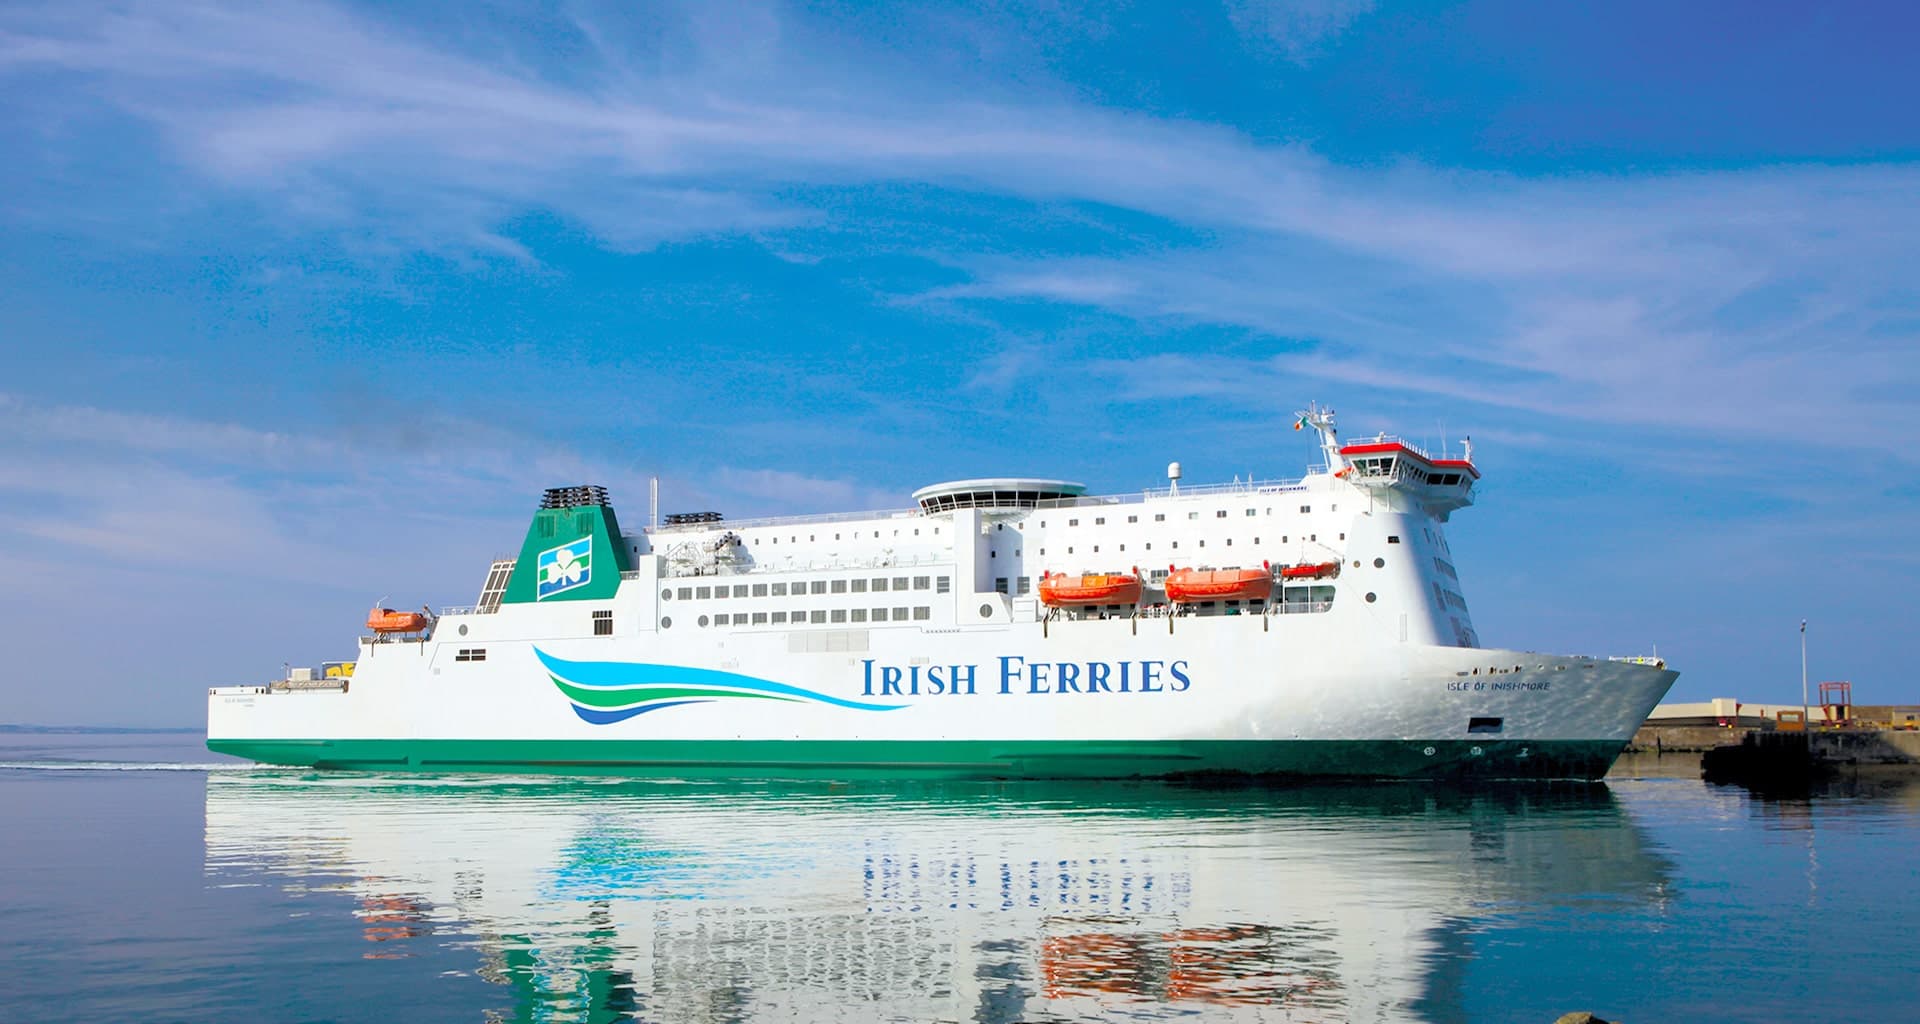 Cross the Channel, from just £69 with Irish Ferries